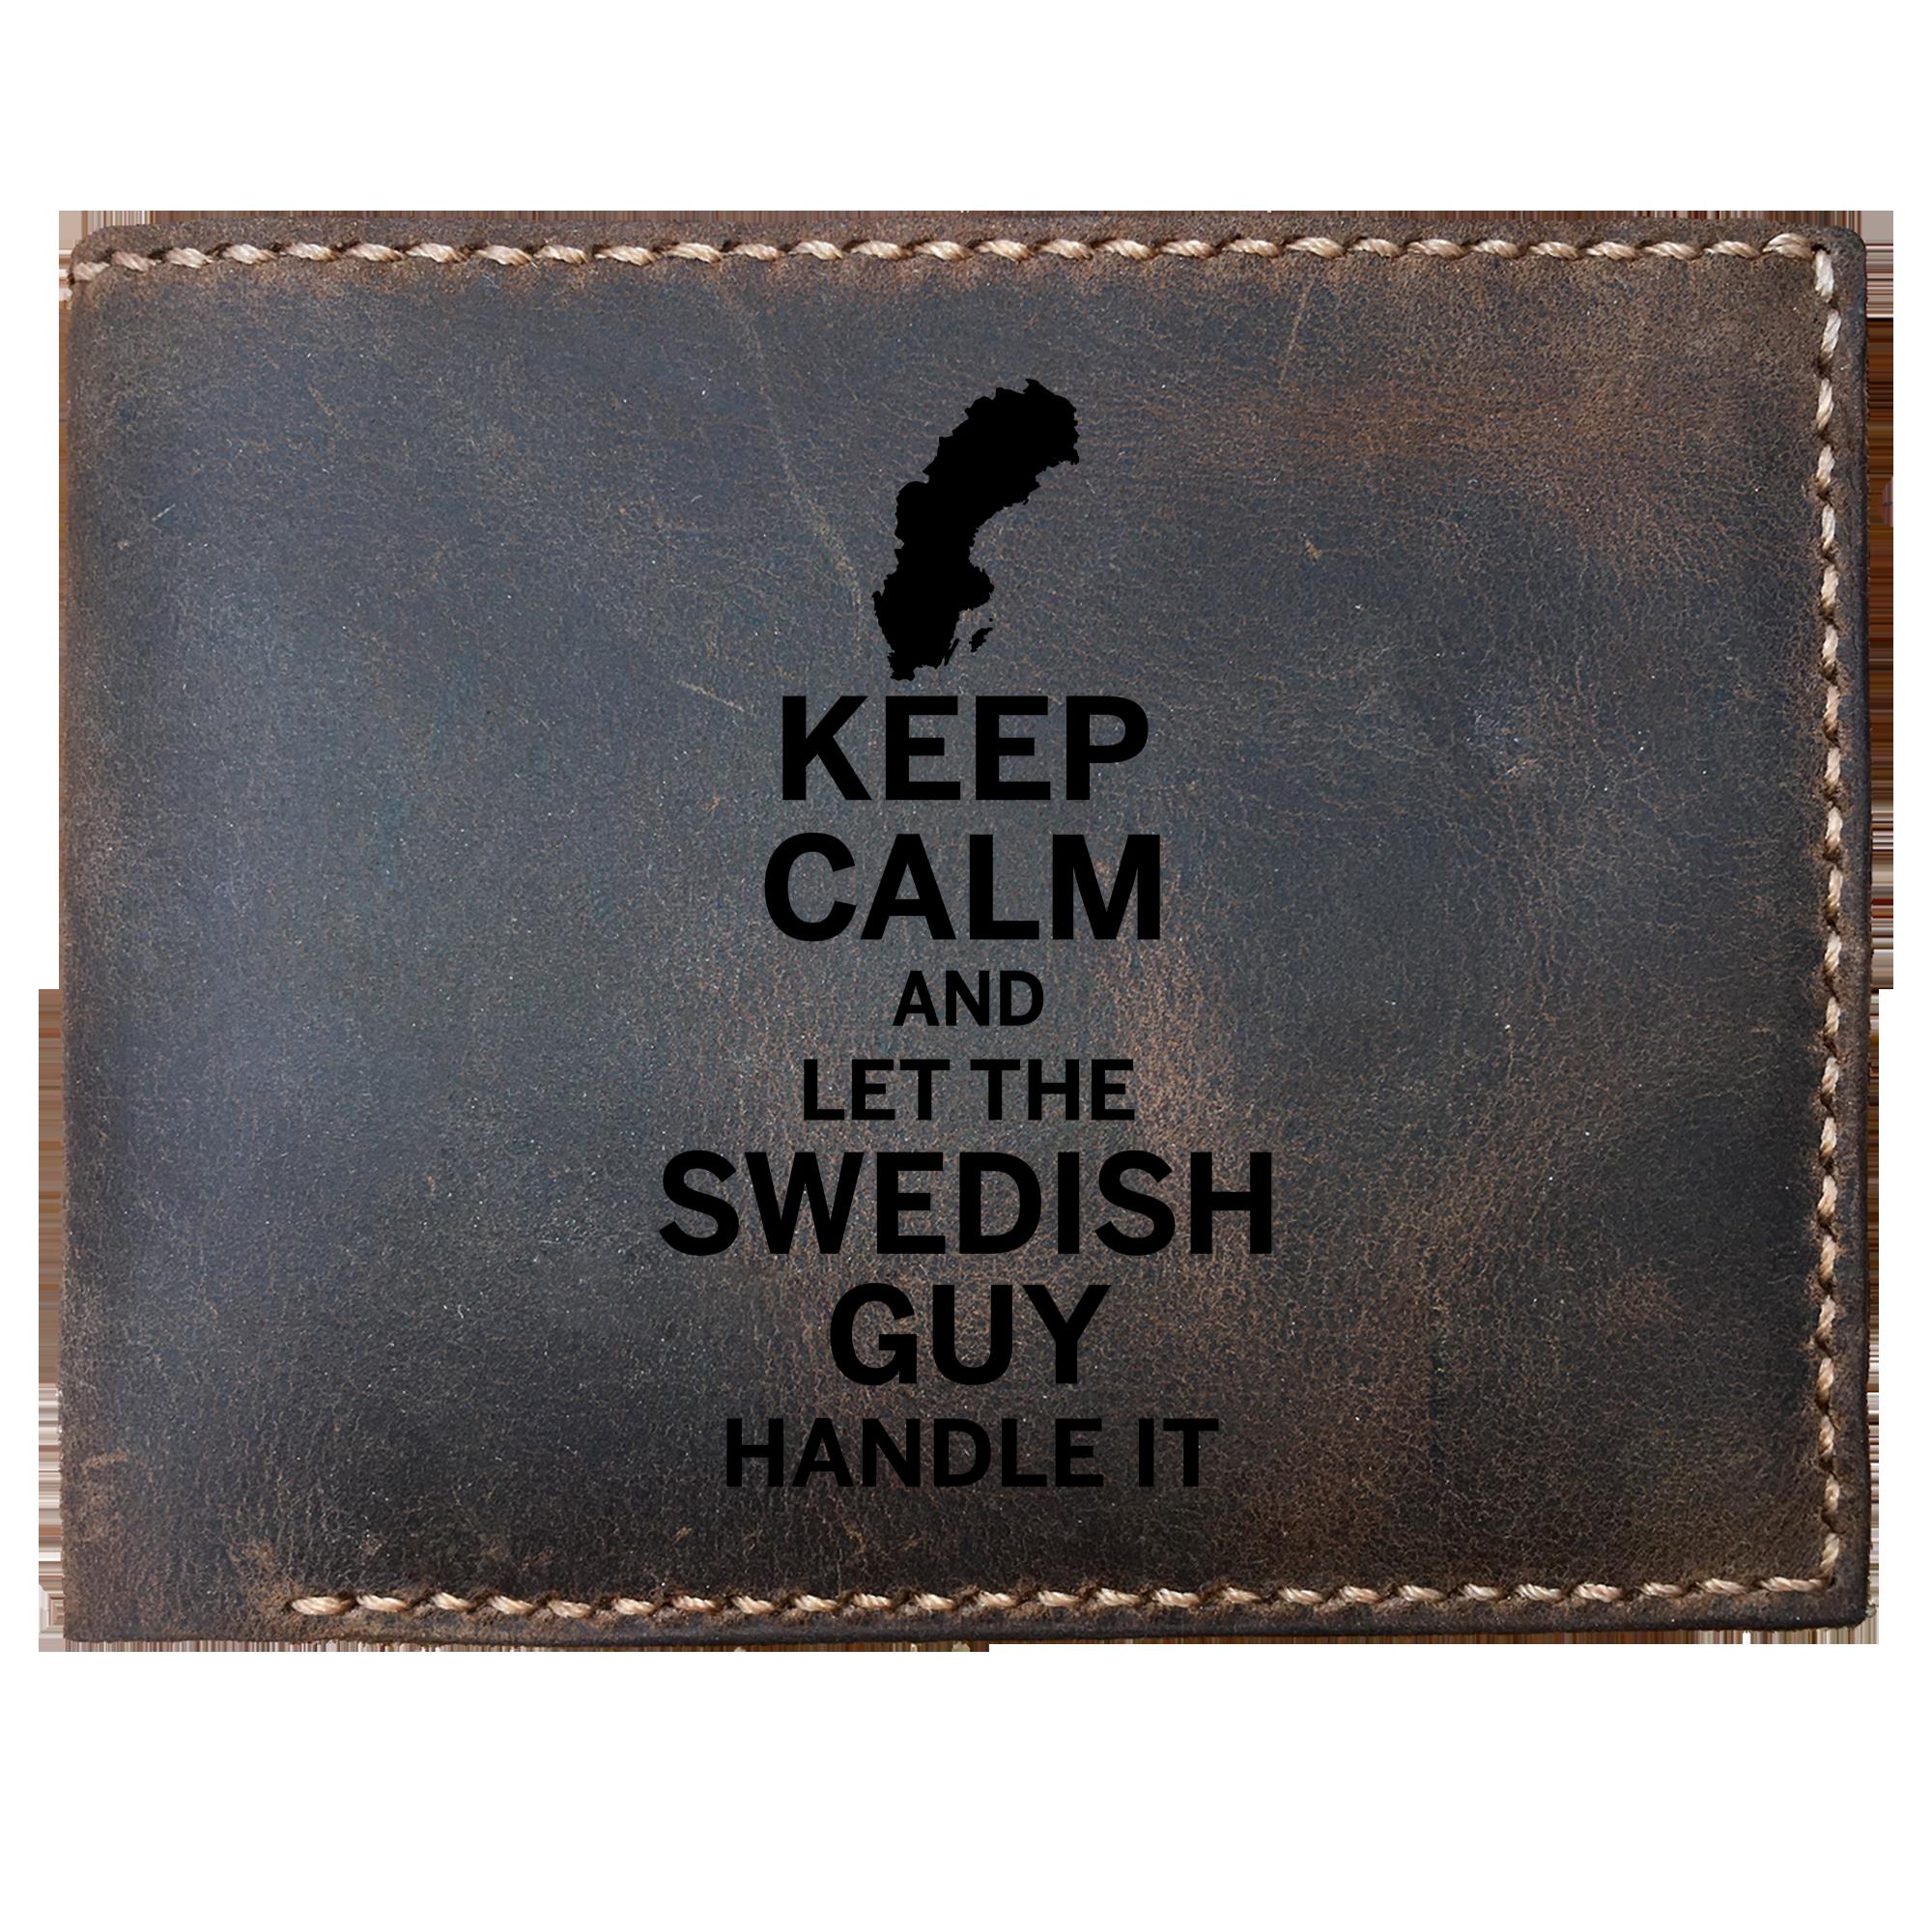 Skitongifts Funny Custom Laser Engraved Bifold Leather Wallet For Men, Keep Calm And Let The Swedish Guy Handle It